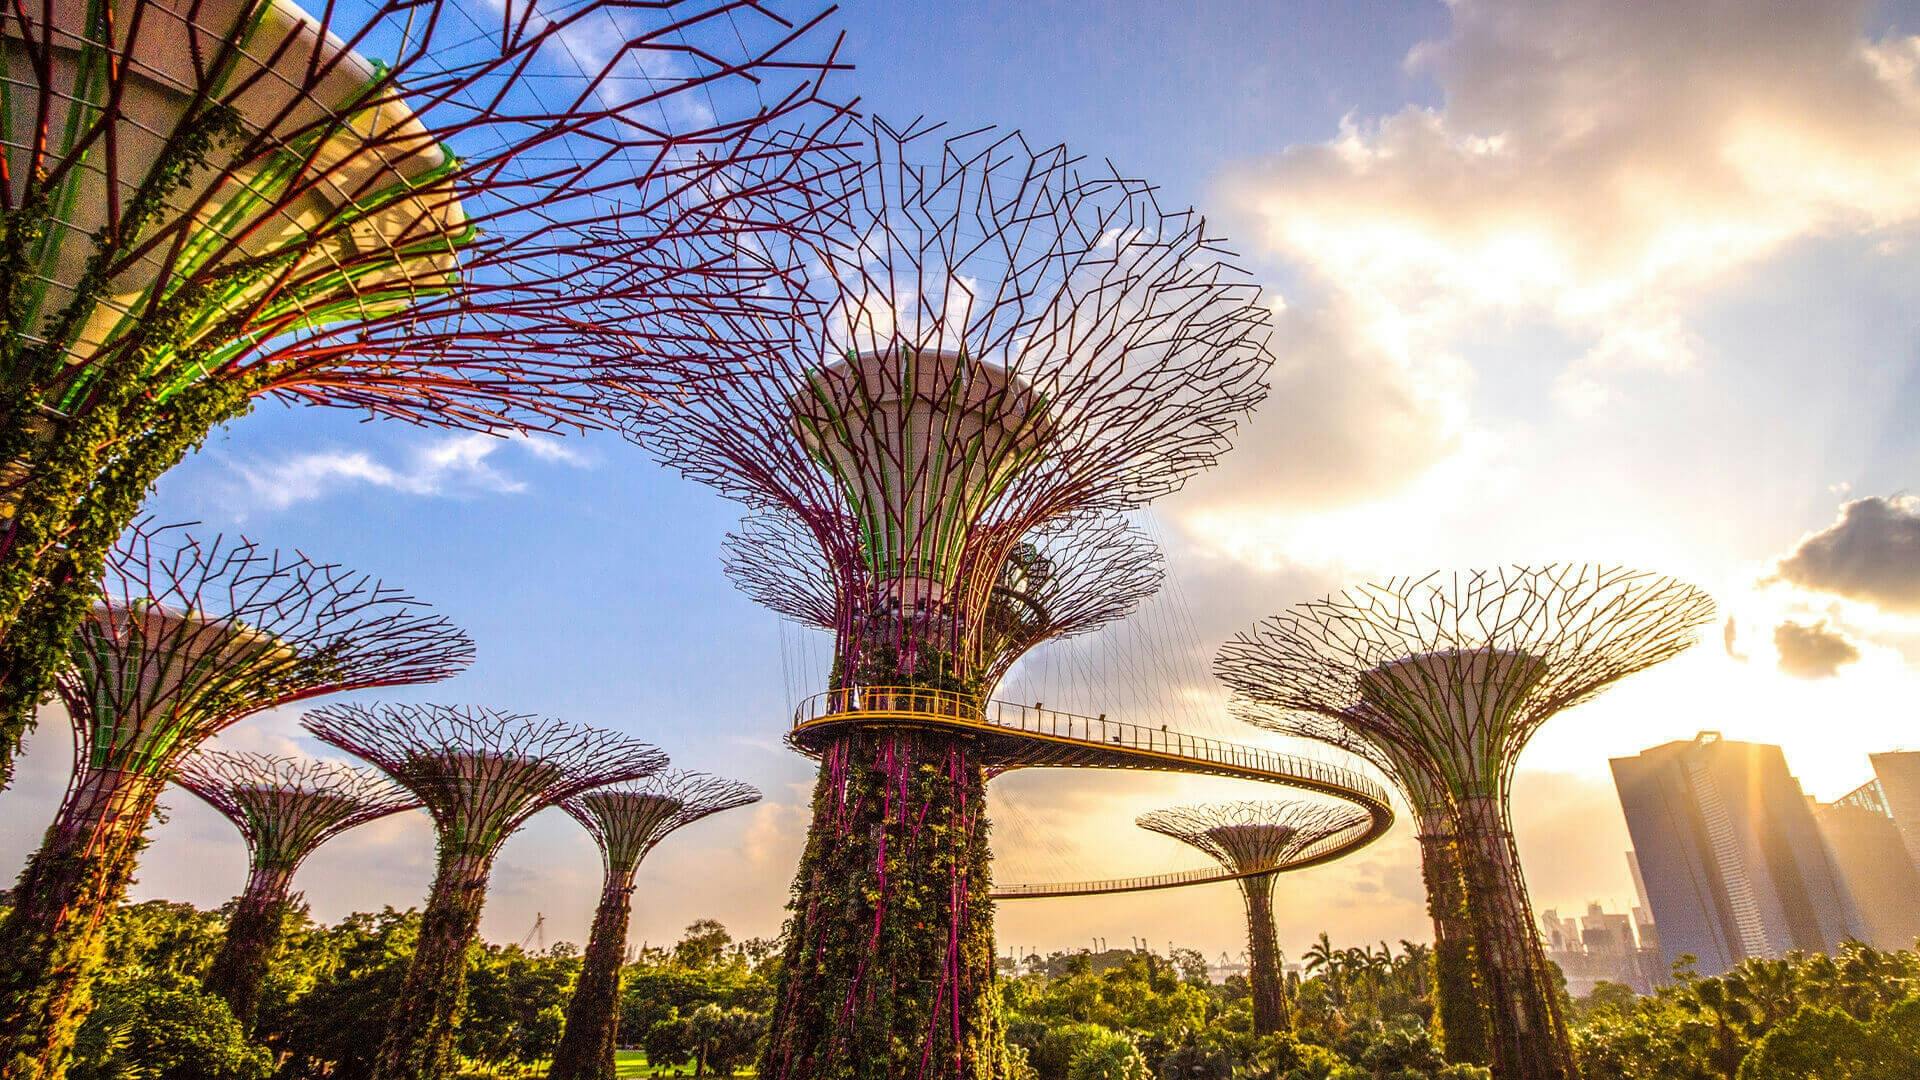 Entrance tickets to the Flower Dome and the Supertree Observatory